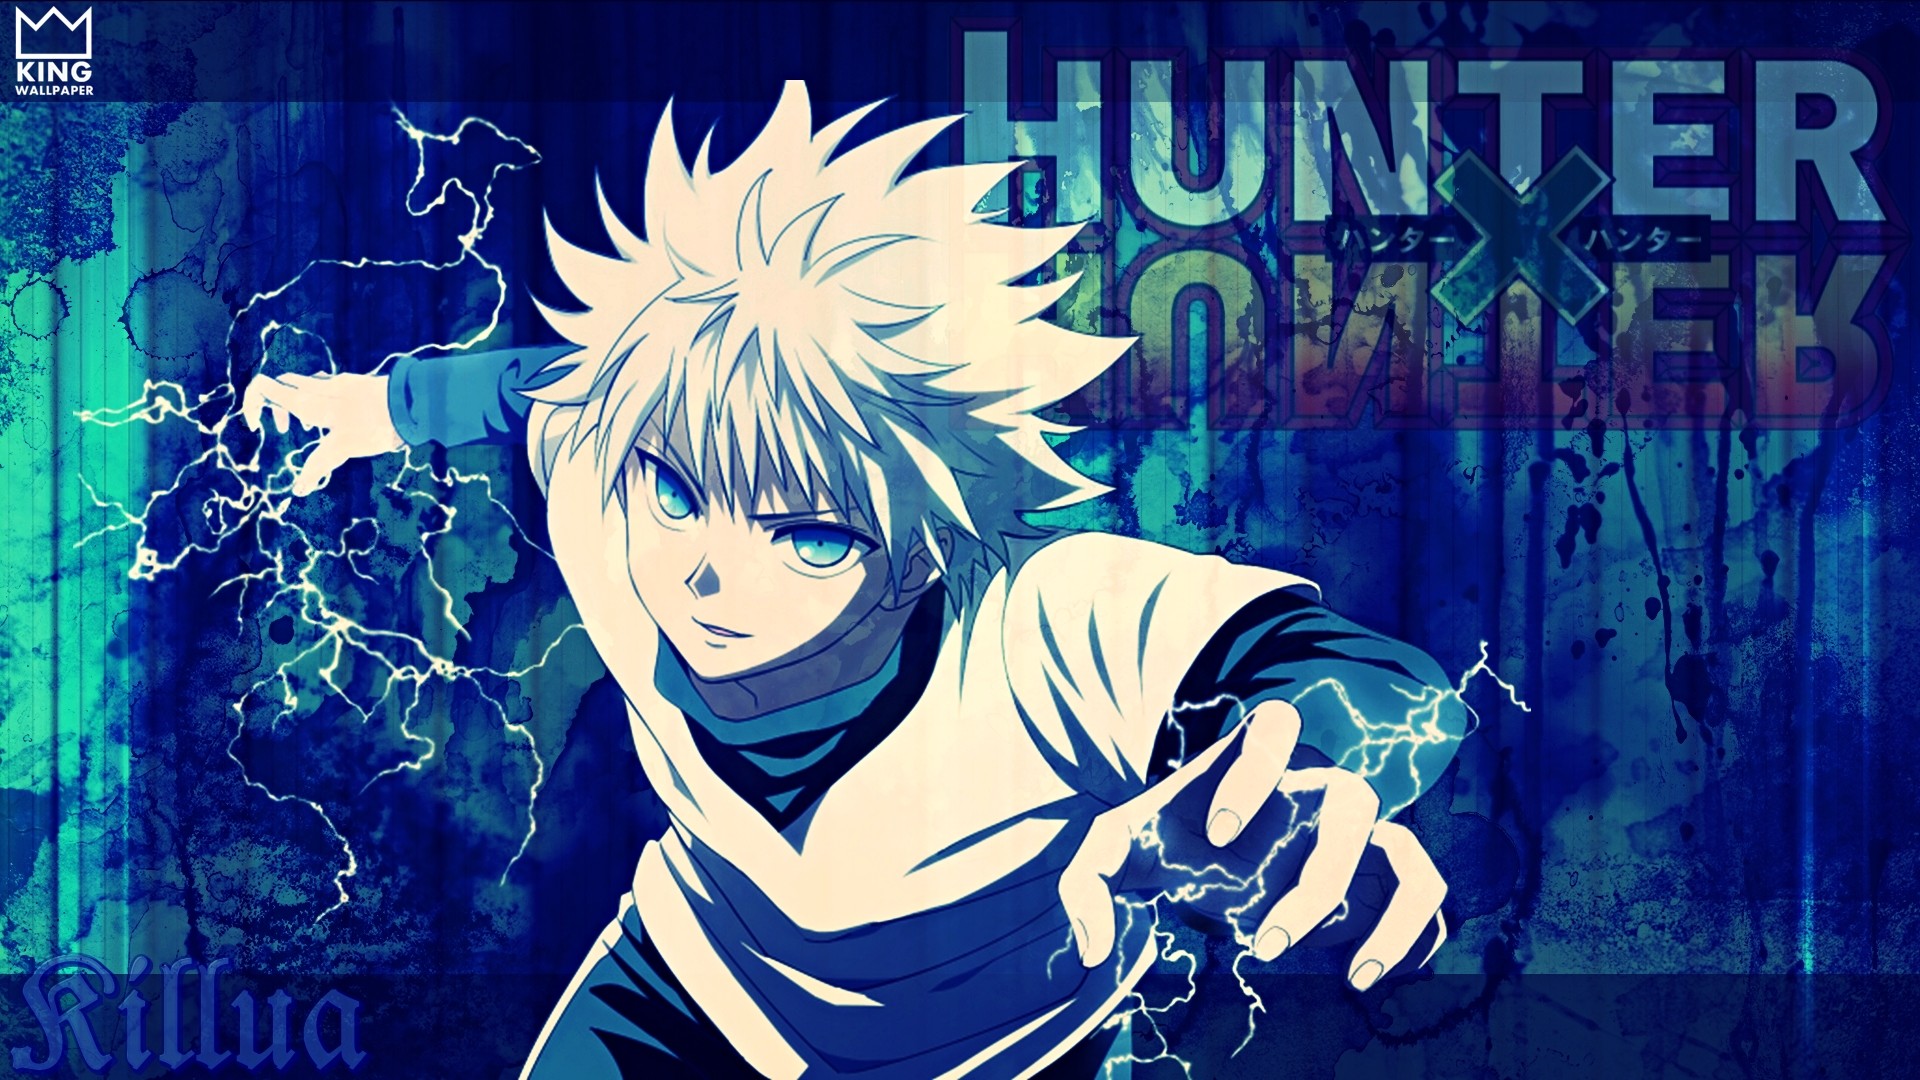 Killua Movie Wallpaper with high-resolution 1920x1080 pixel. You can use this poster wallpaper for your Desktop Computers, Mac Screensavers, Windows Backgrounds, iPhone Wallpapers, Tablet or Android Lock screen and another Mobile device